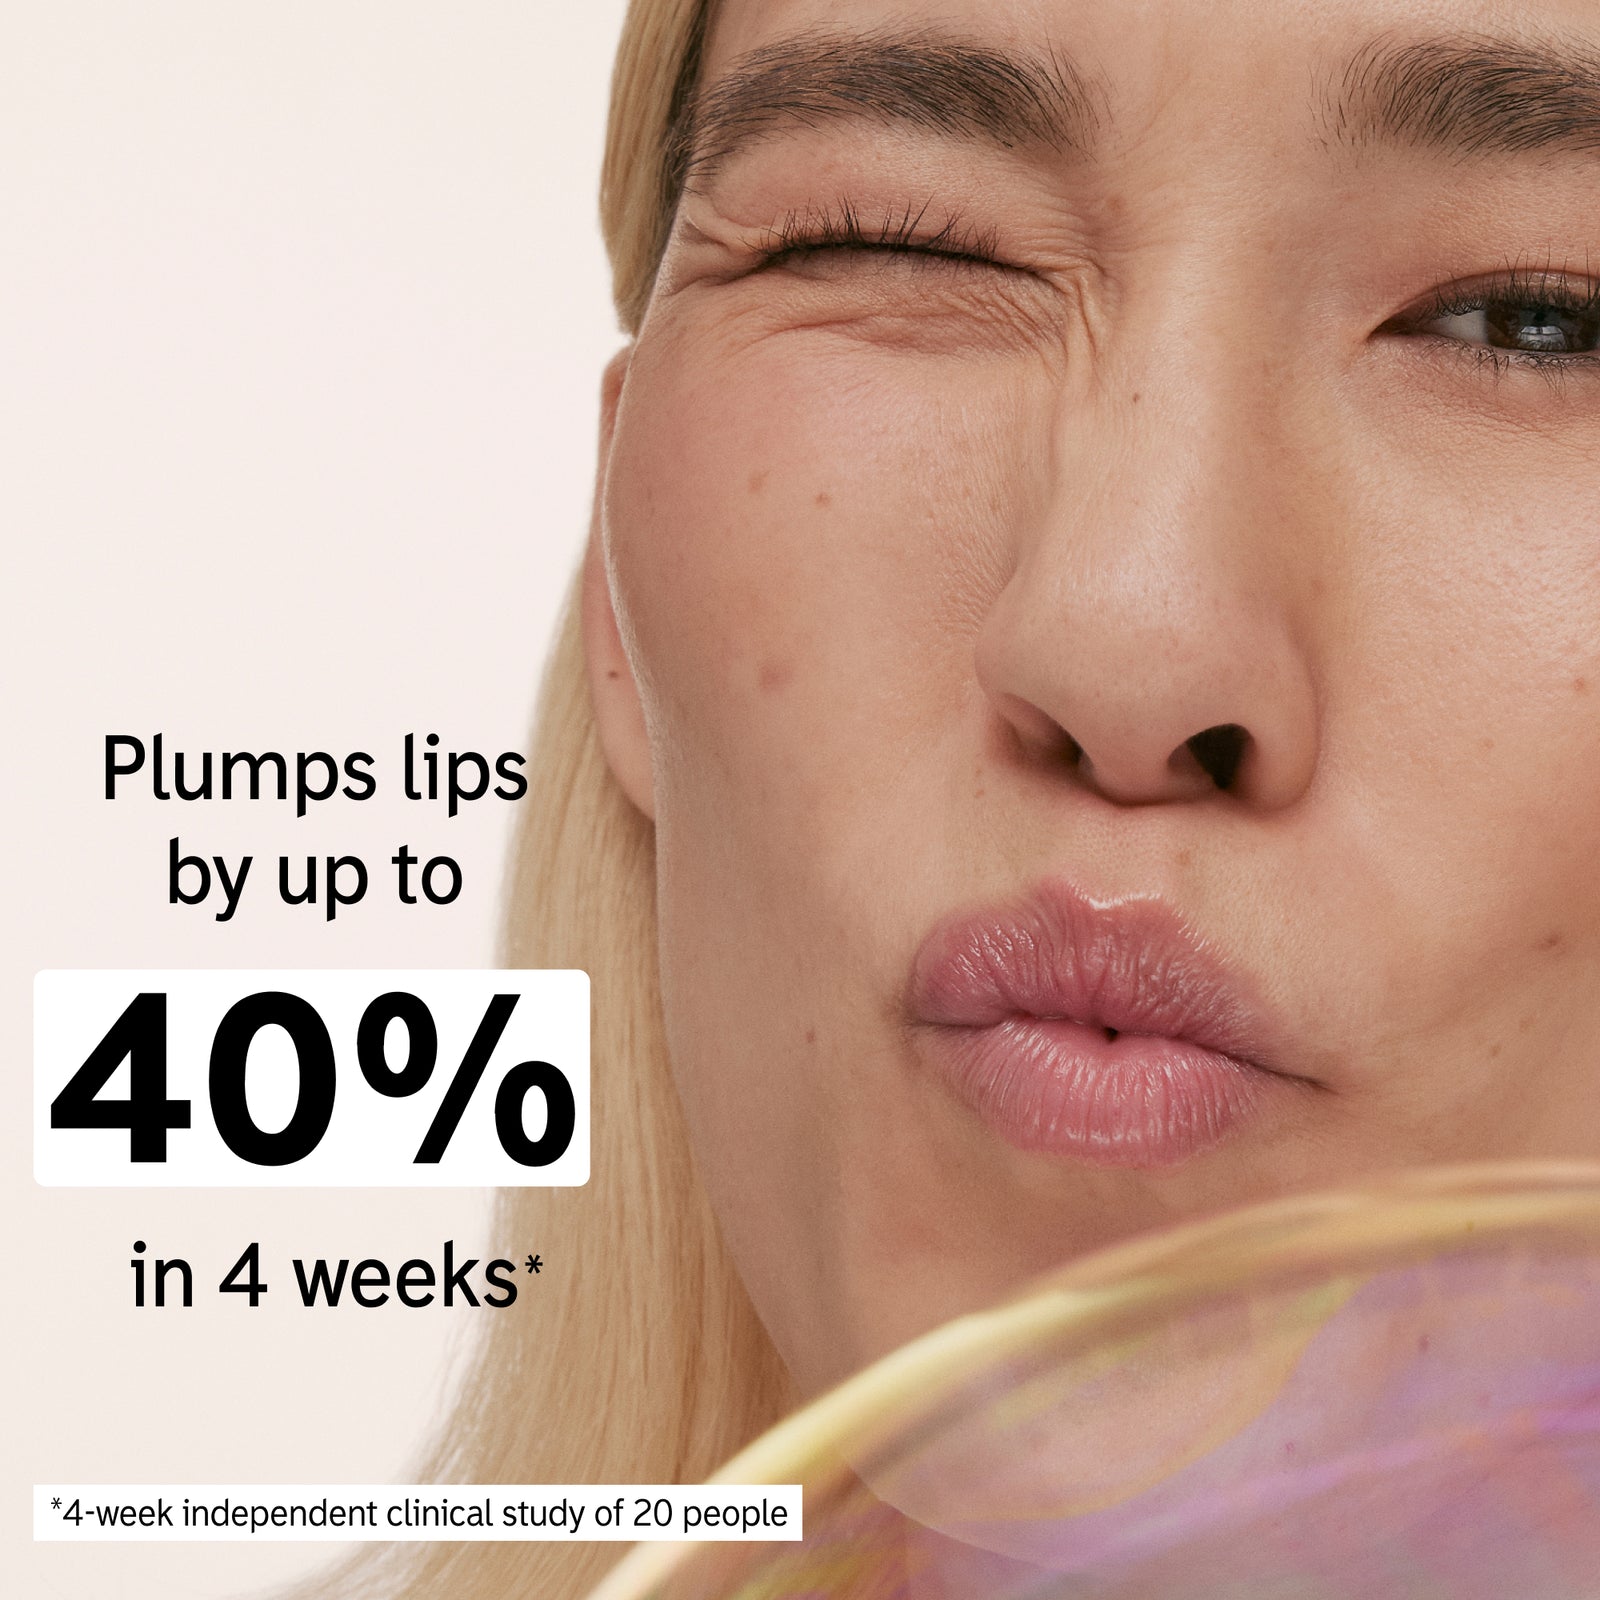 Model holding a tube of Tripeptide Plumping Lip Balm to her face with key claim statistic